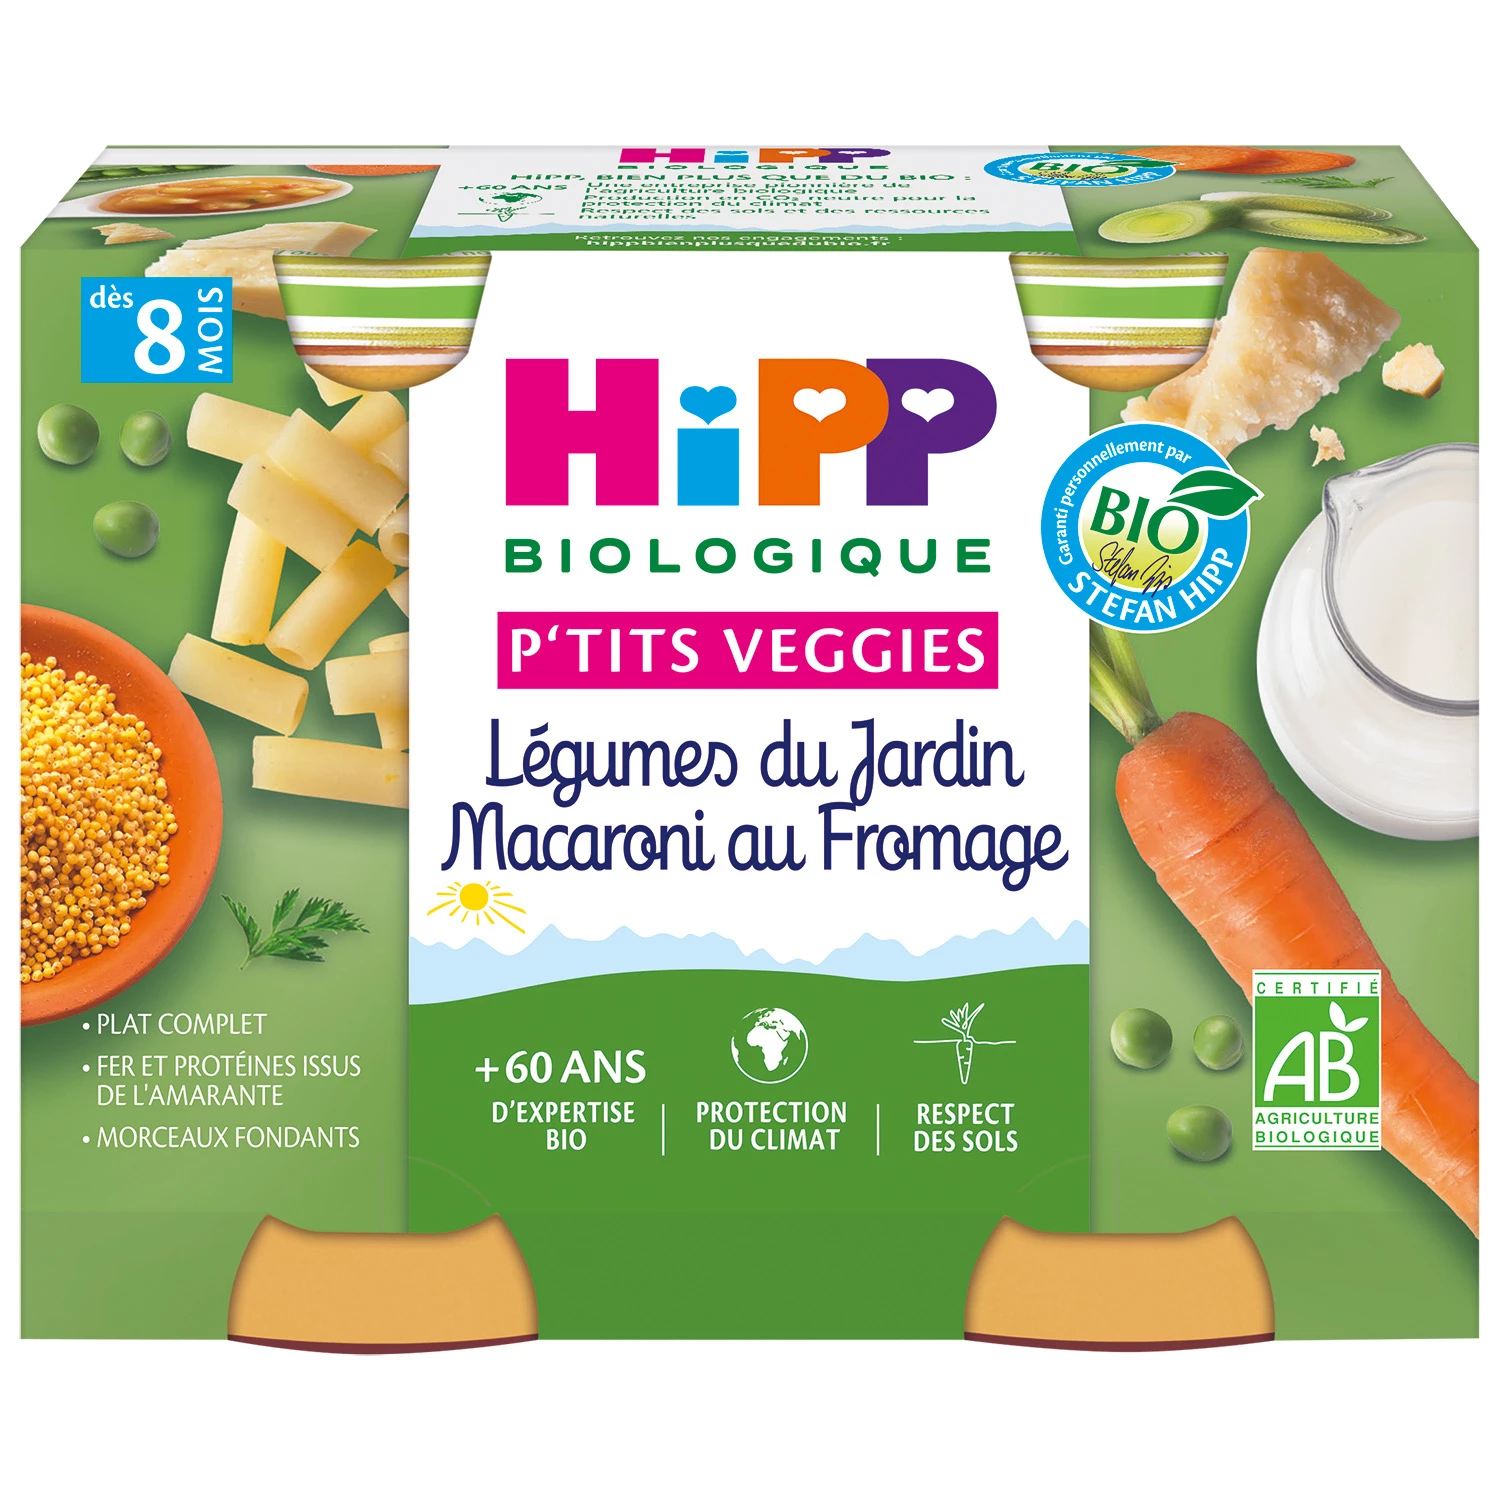 Small baby pots from 8 months Organic garden vegetables macaroni and cheese, 2 pots of 190g HIPP BioLOGIQUE